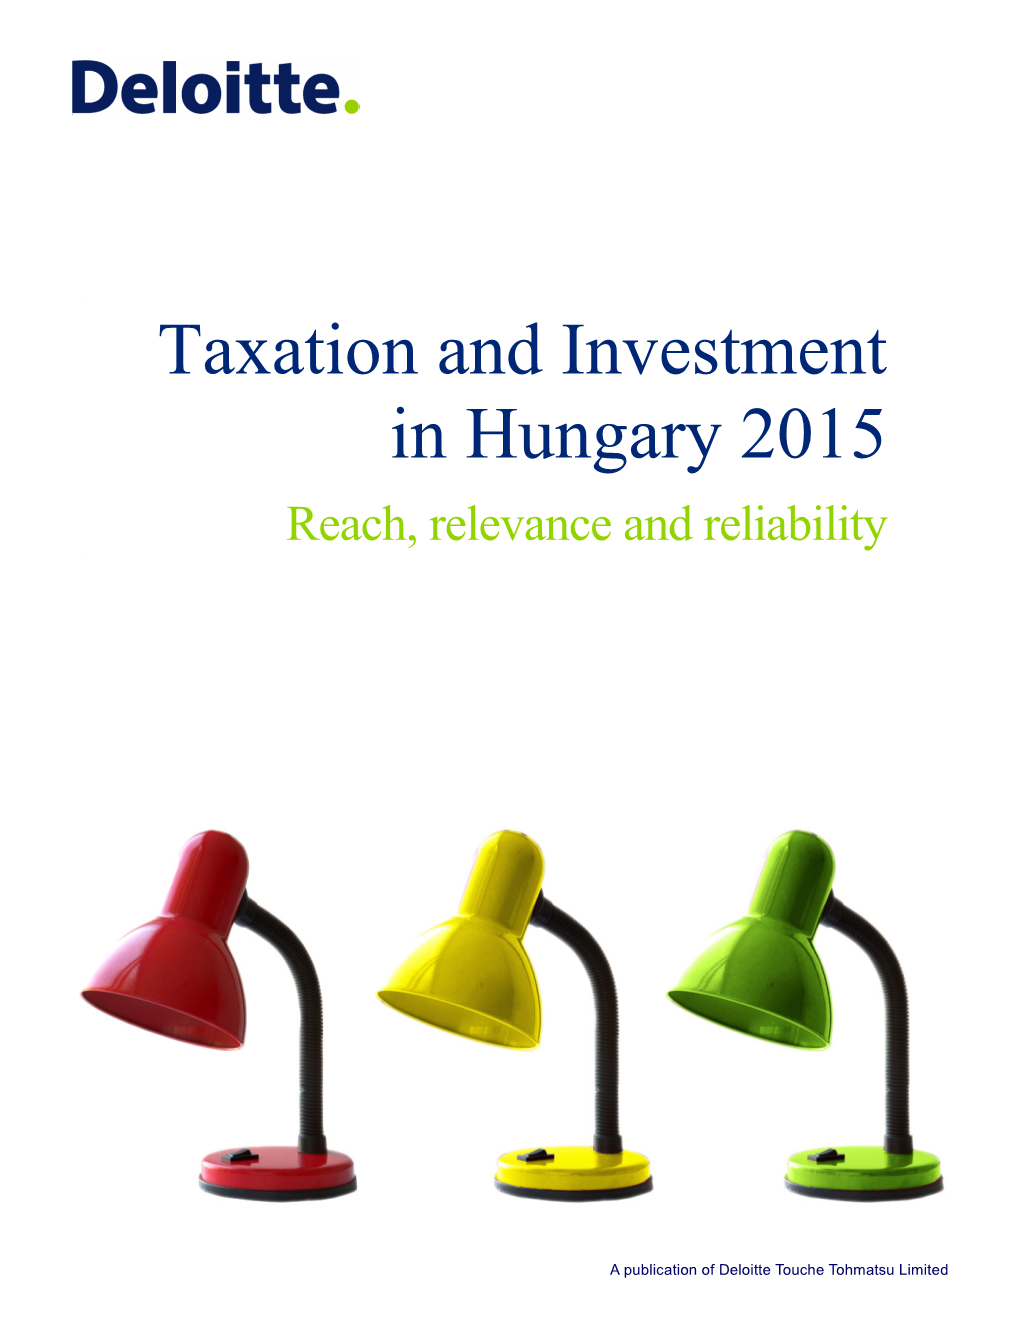 Taxation and Investment in Hungary 2015 Reach, Relevance and Reliability